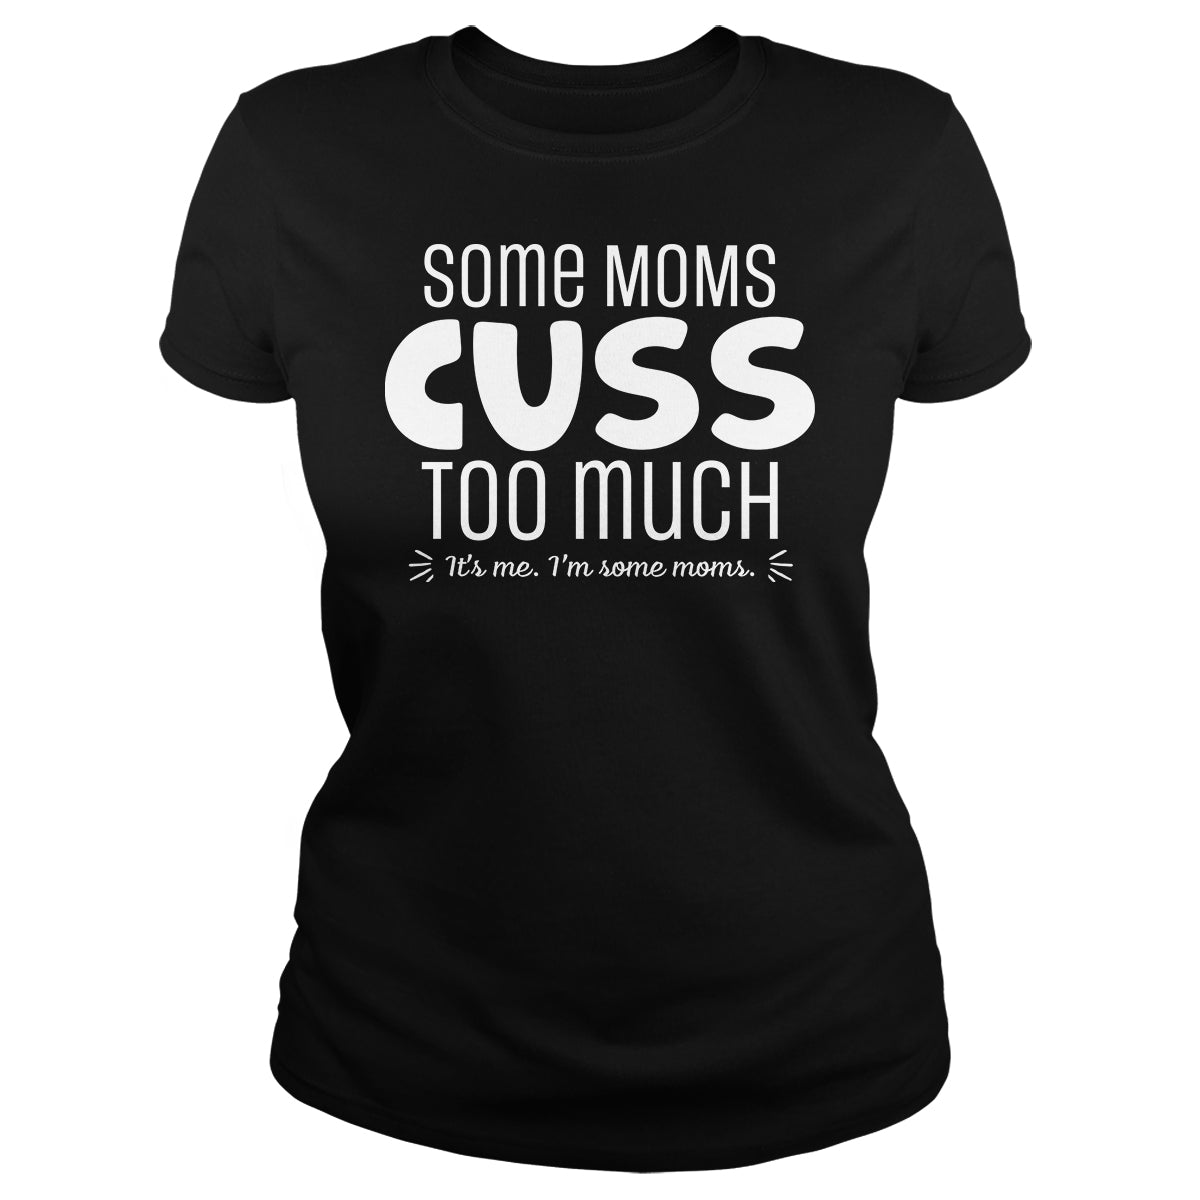 Some Moms - BustedTees.com